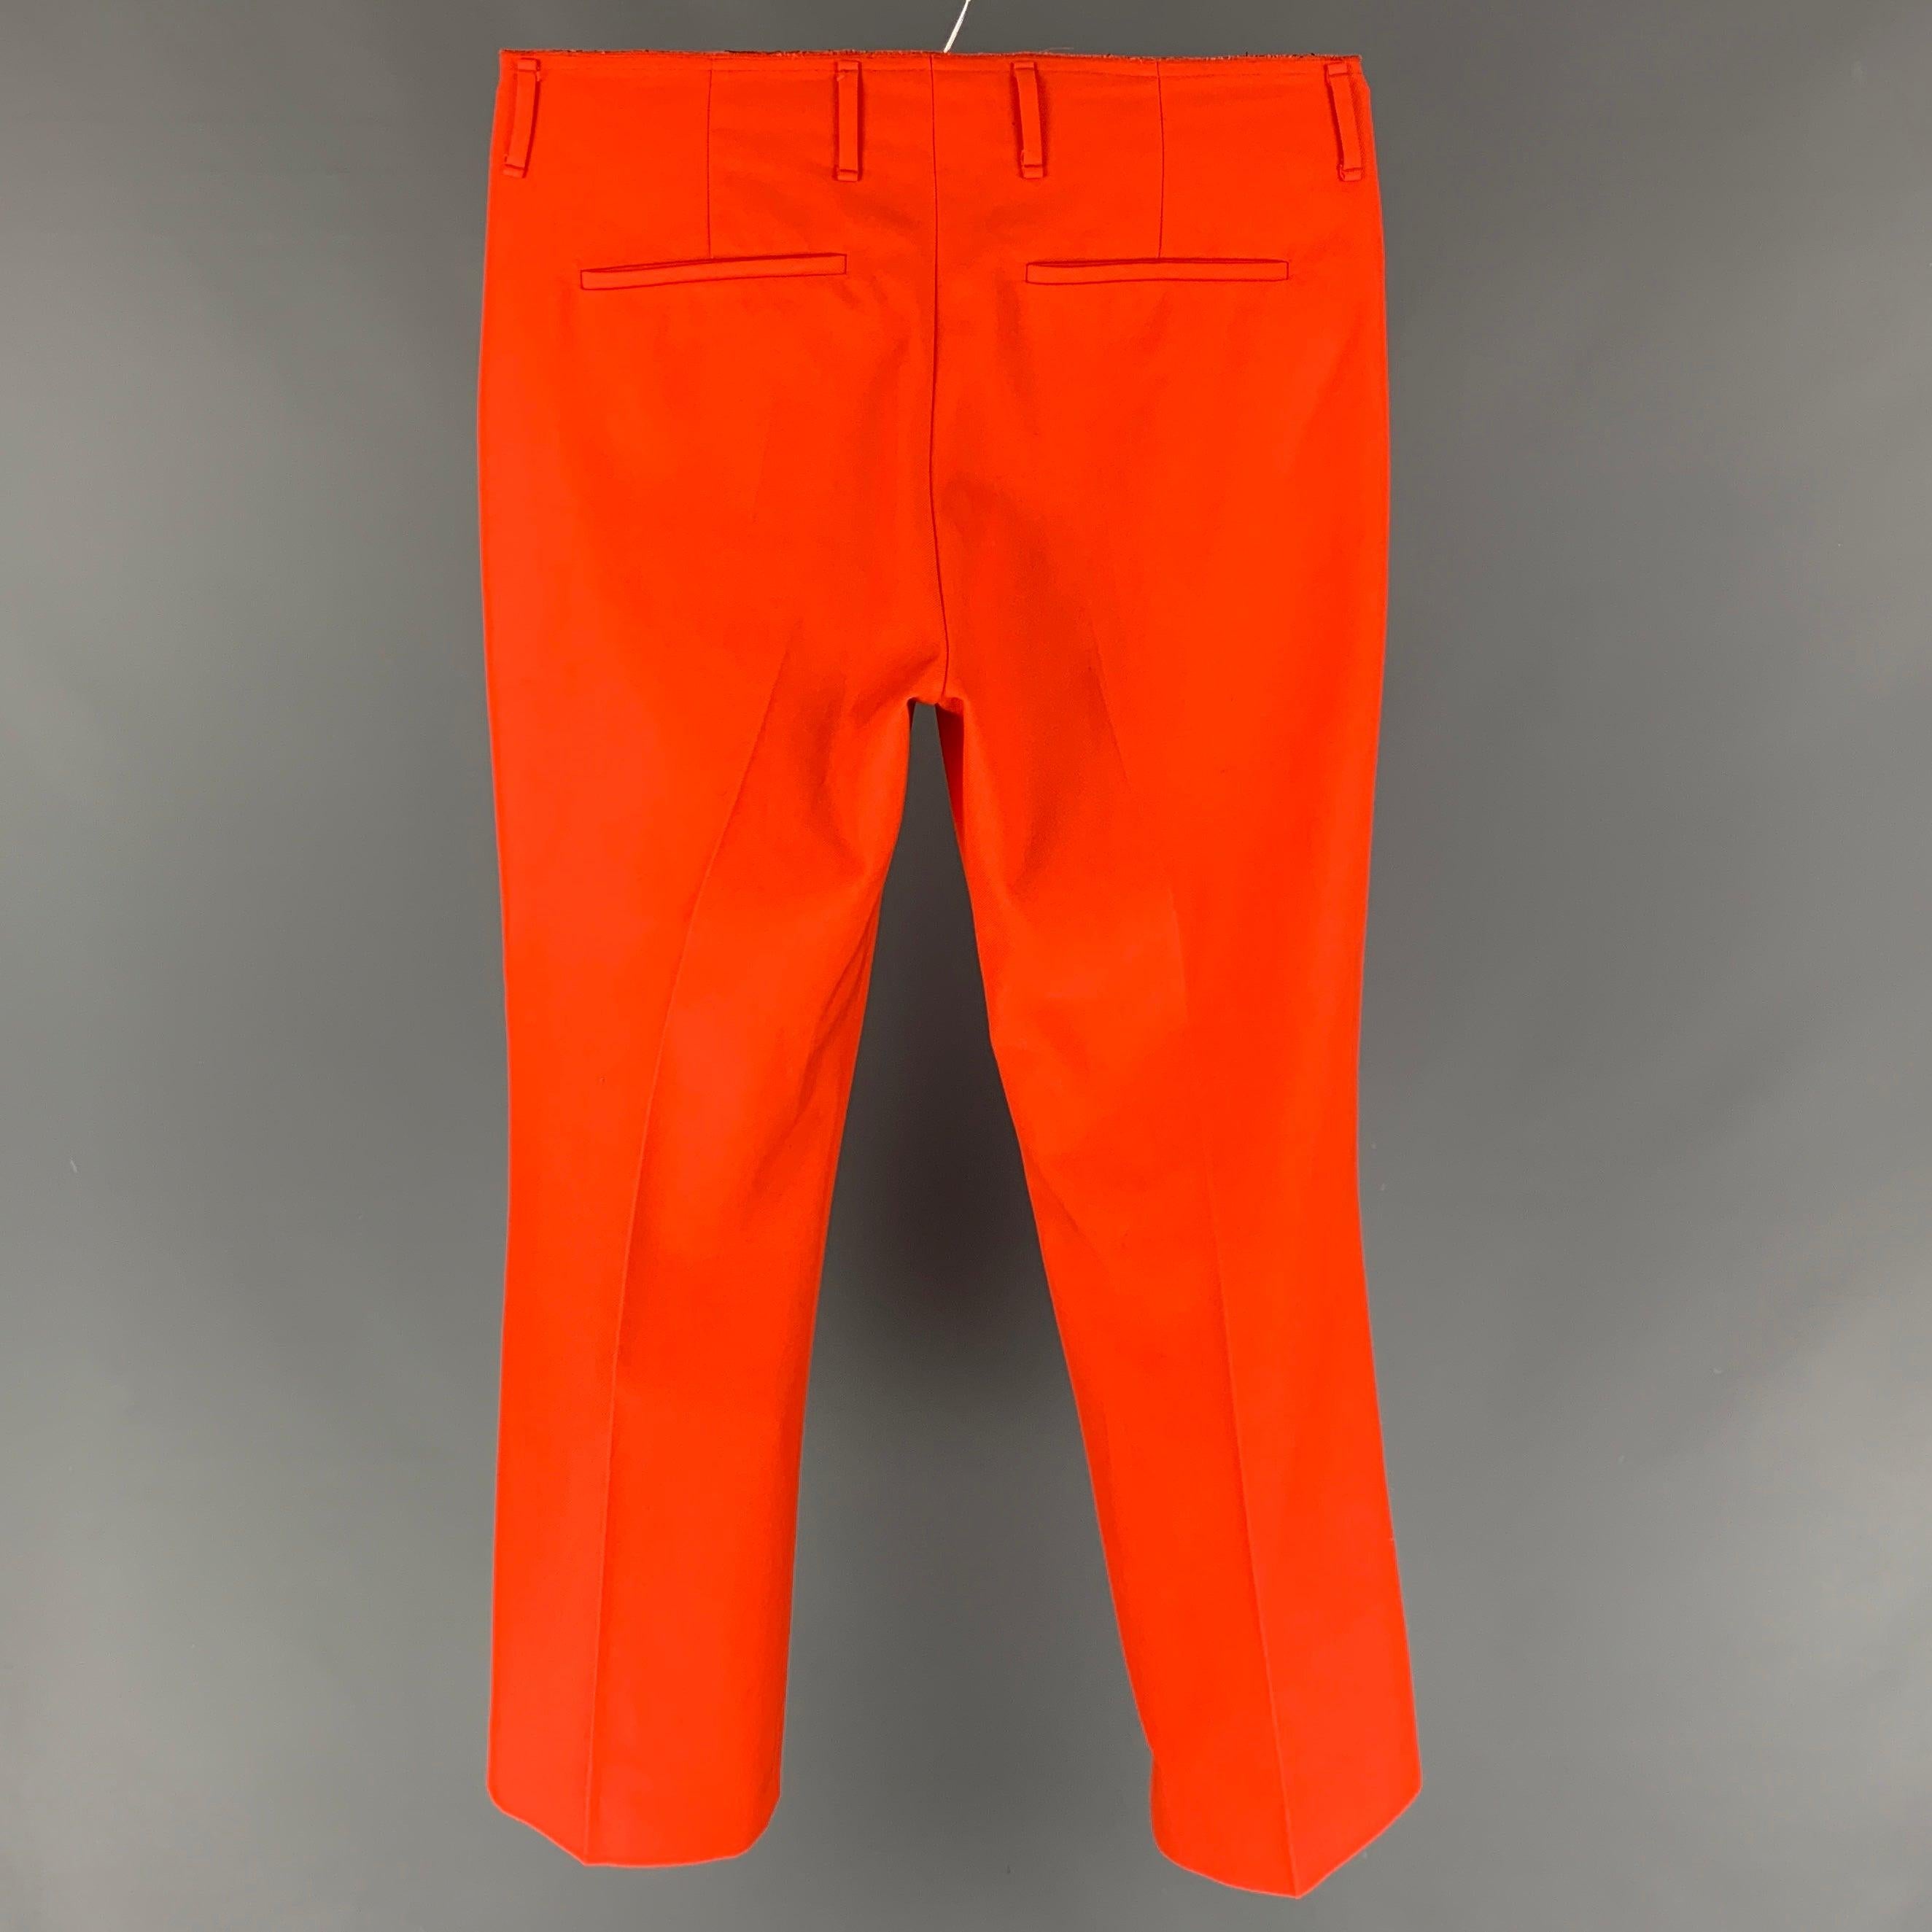 ACNE STUDIOS pants comes in a orange cotton / polyester featuring a flat front, raw edge, and a zip fly closure. Made in Romania.
 Very Good
 Pre-Owned Condition. 
 

 Marked:  48 
 

 Measurements: 
  Waist: 32 inches Rise: 11 inches Inseam: 30